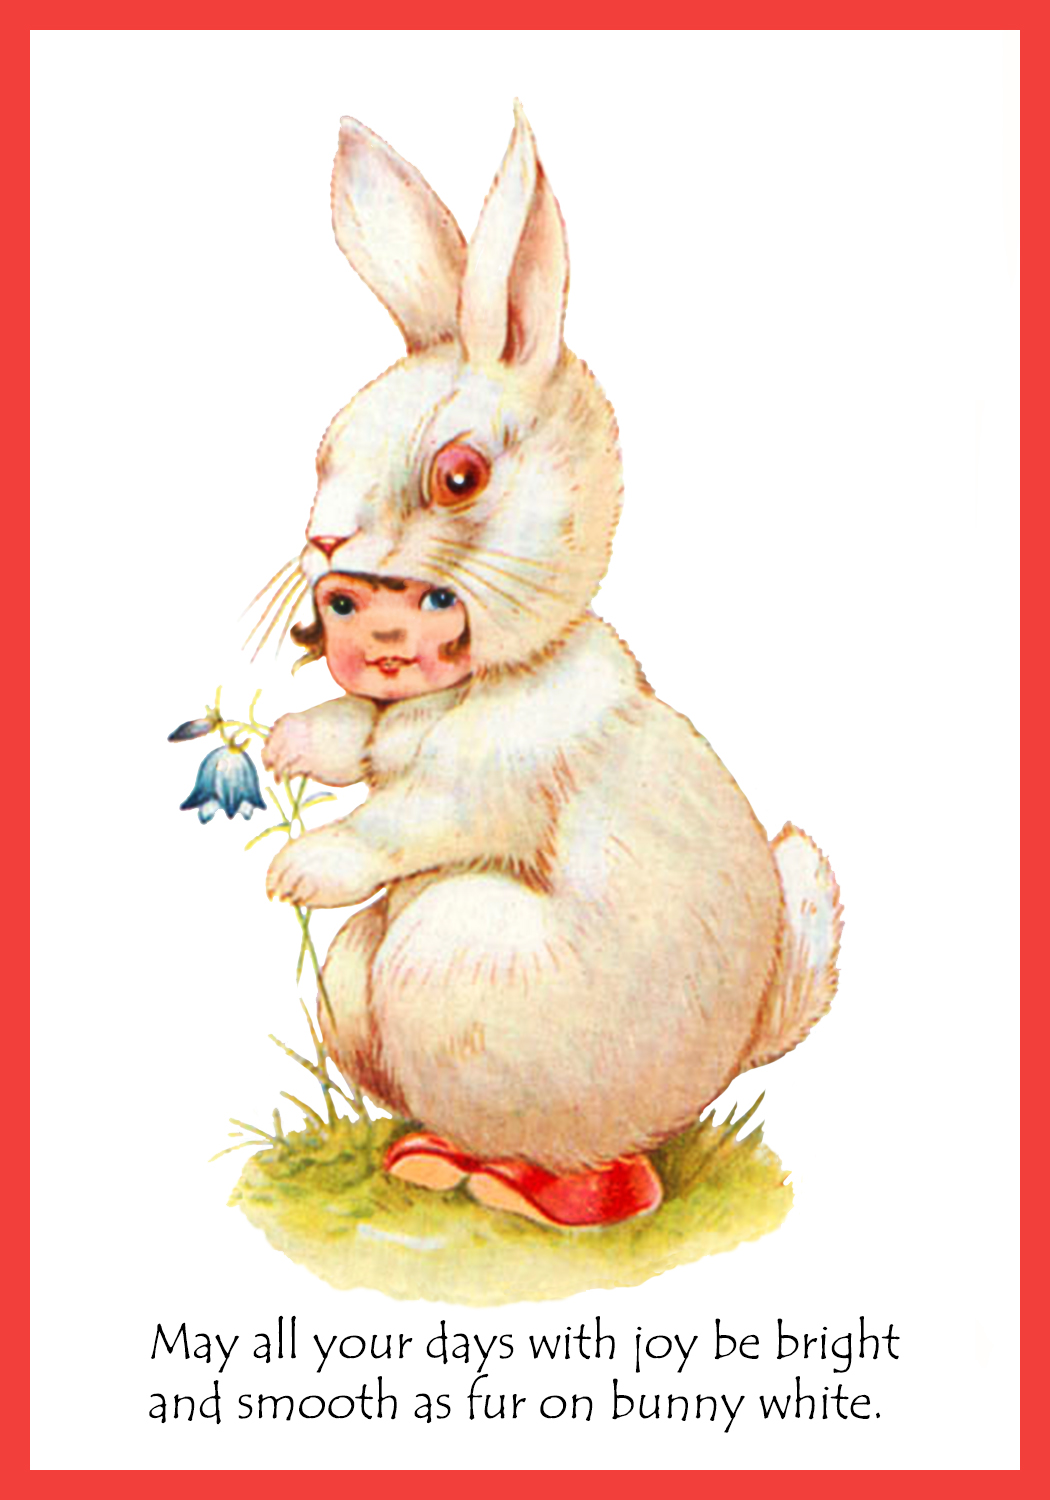 16-free-funny-easter-greeting-cards